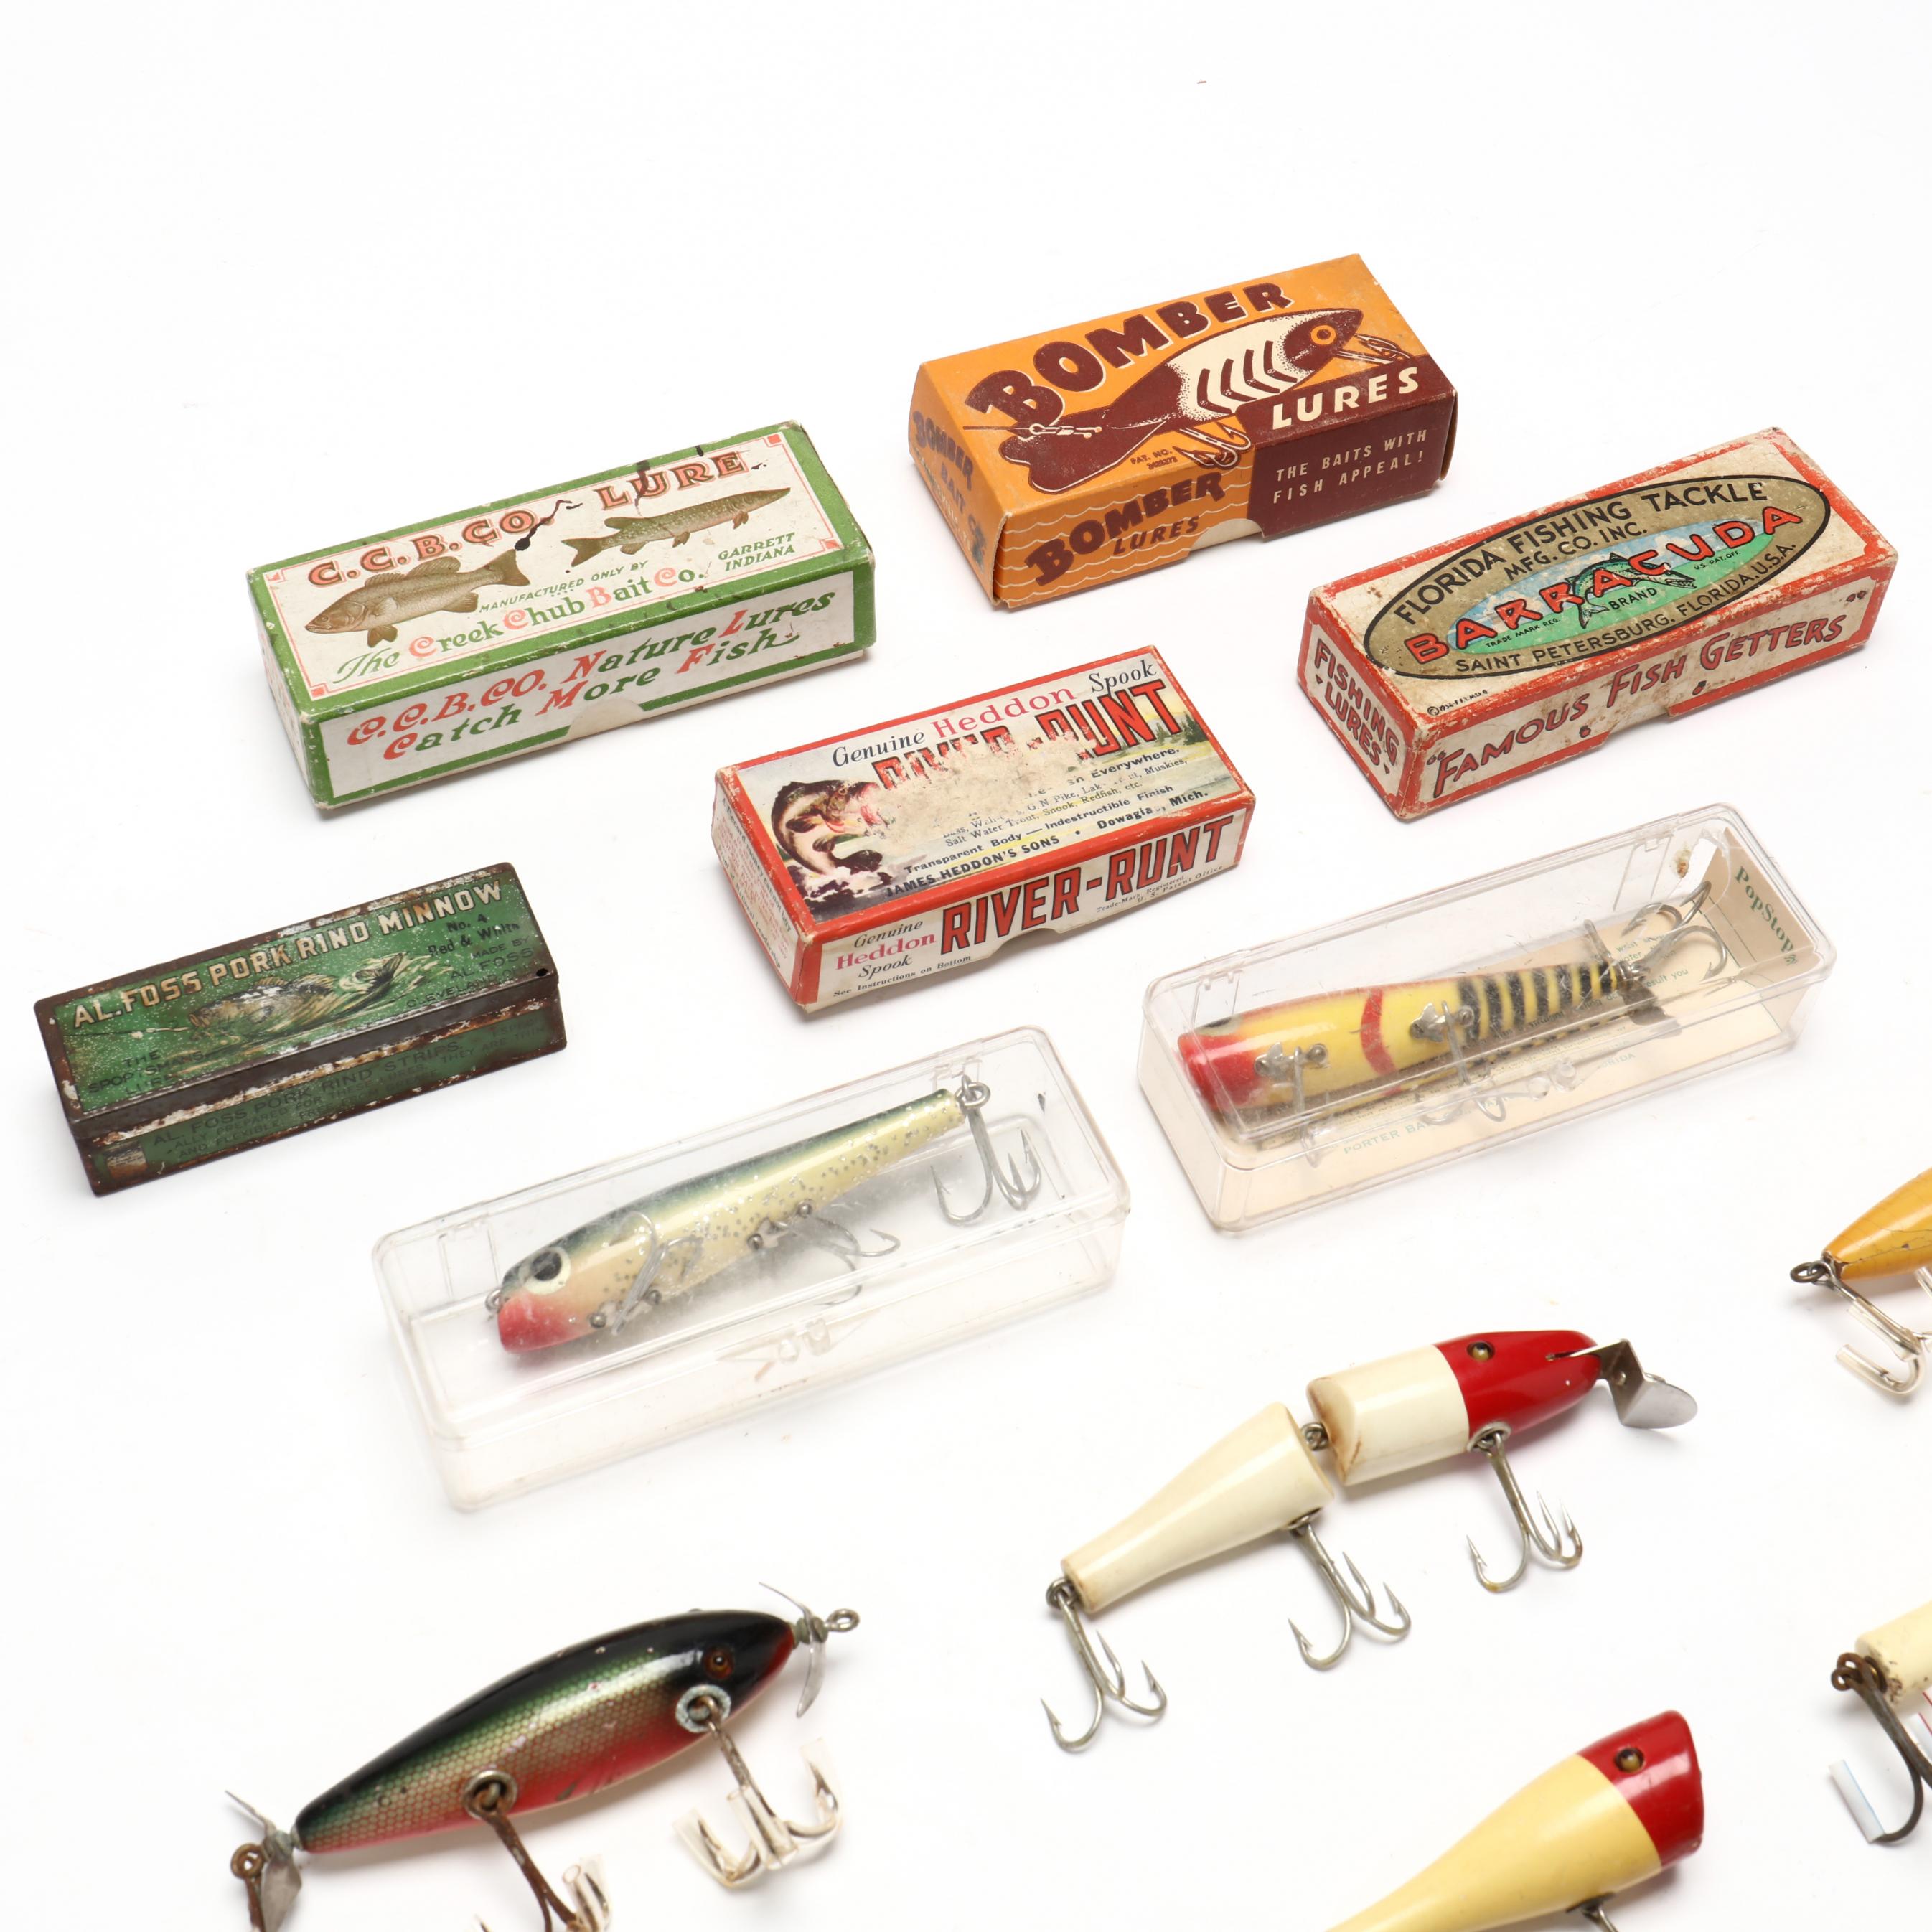  Gallery Prints Bomber Lures: Vintage Fishing Lure